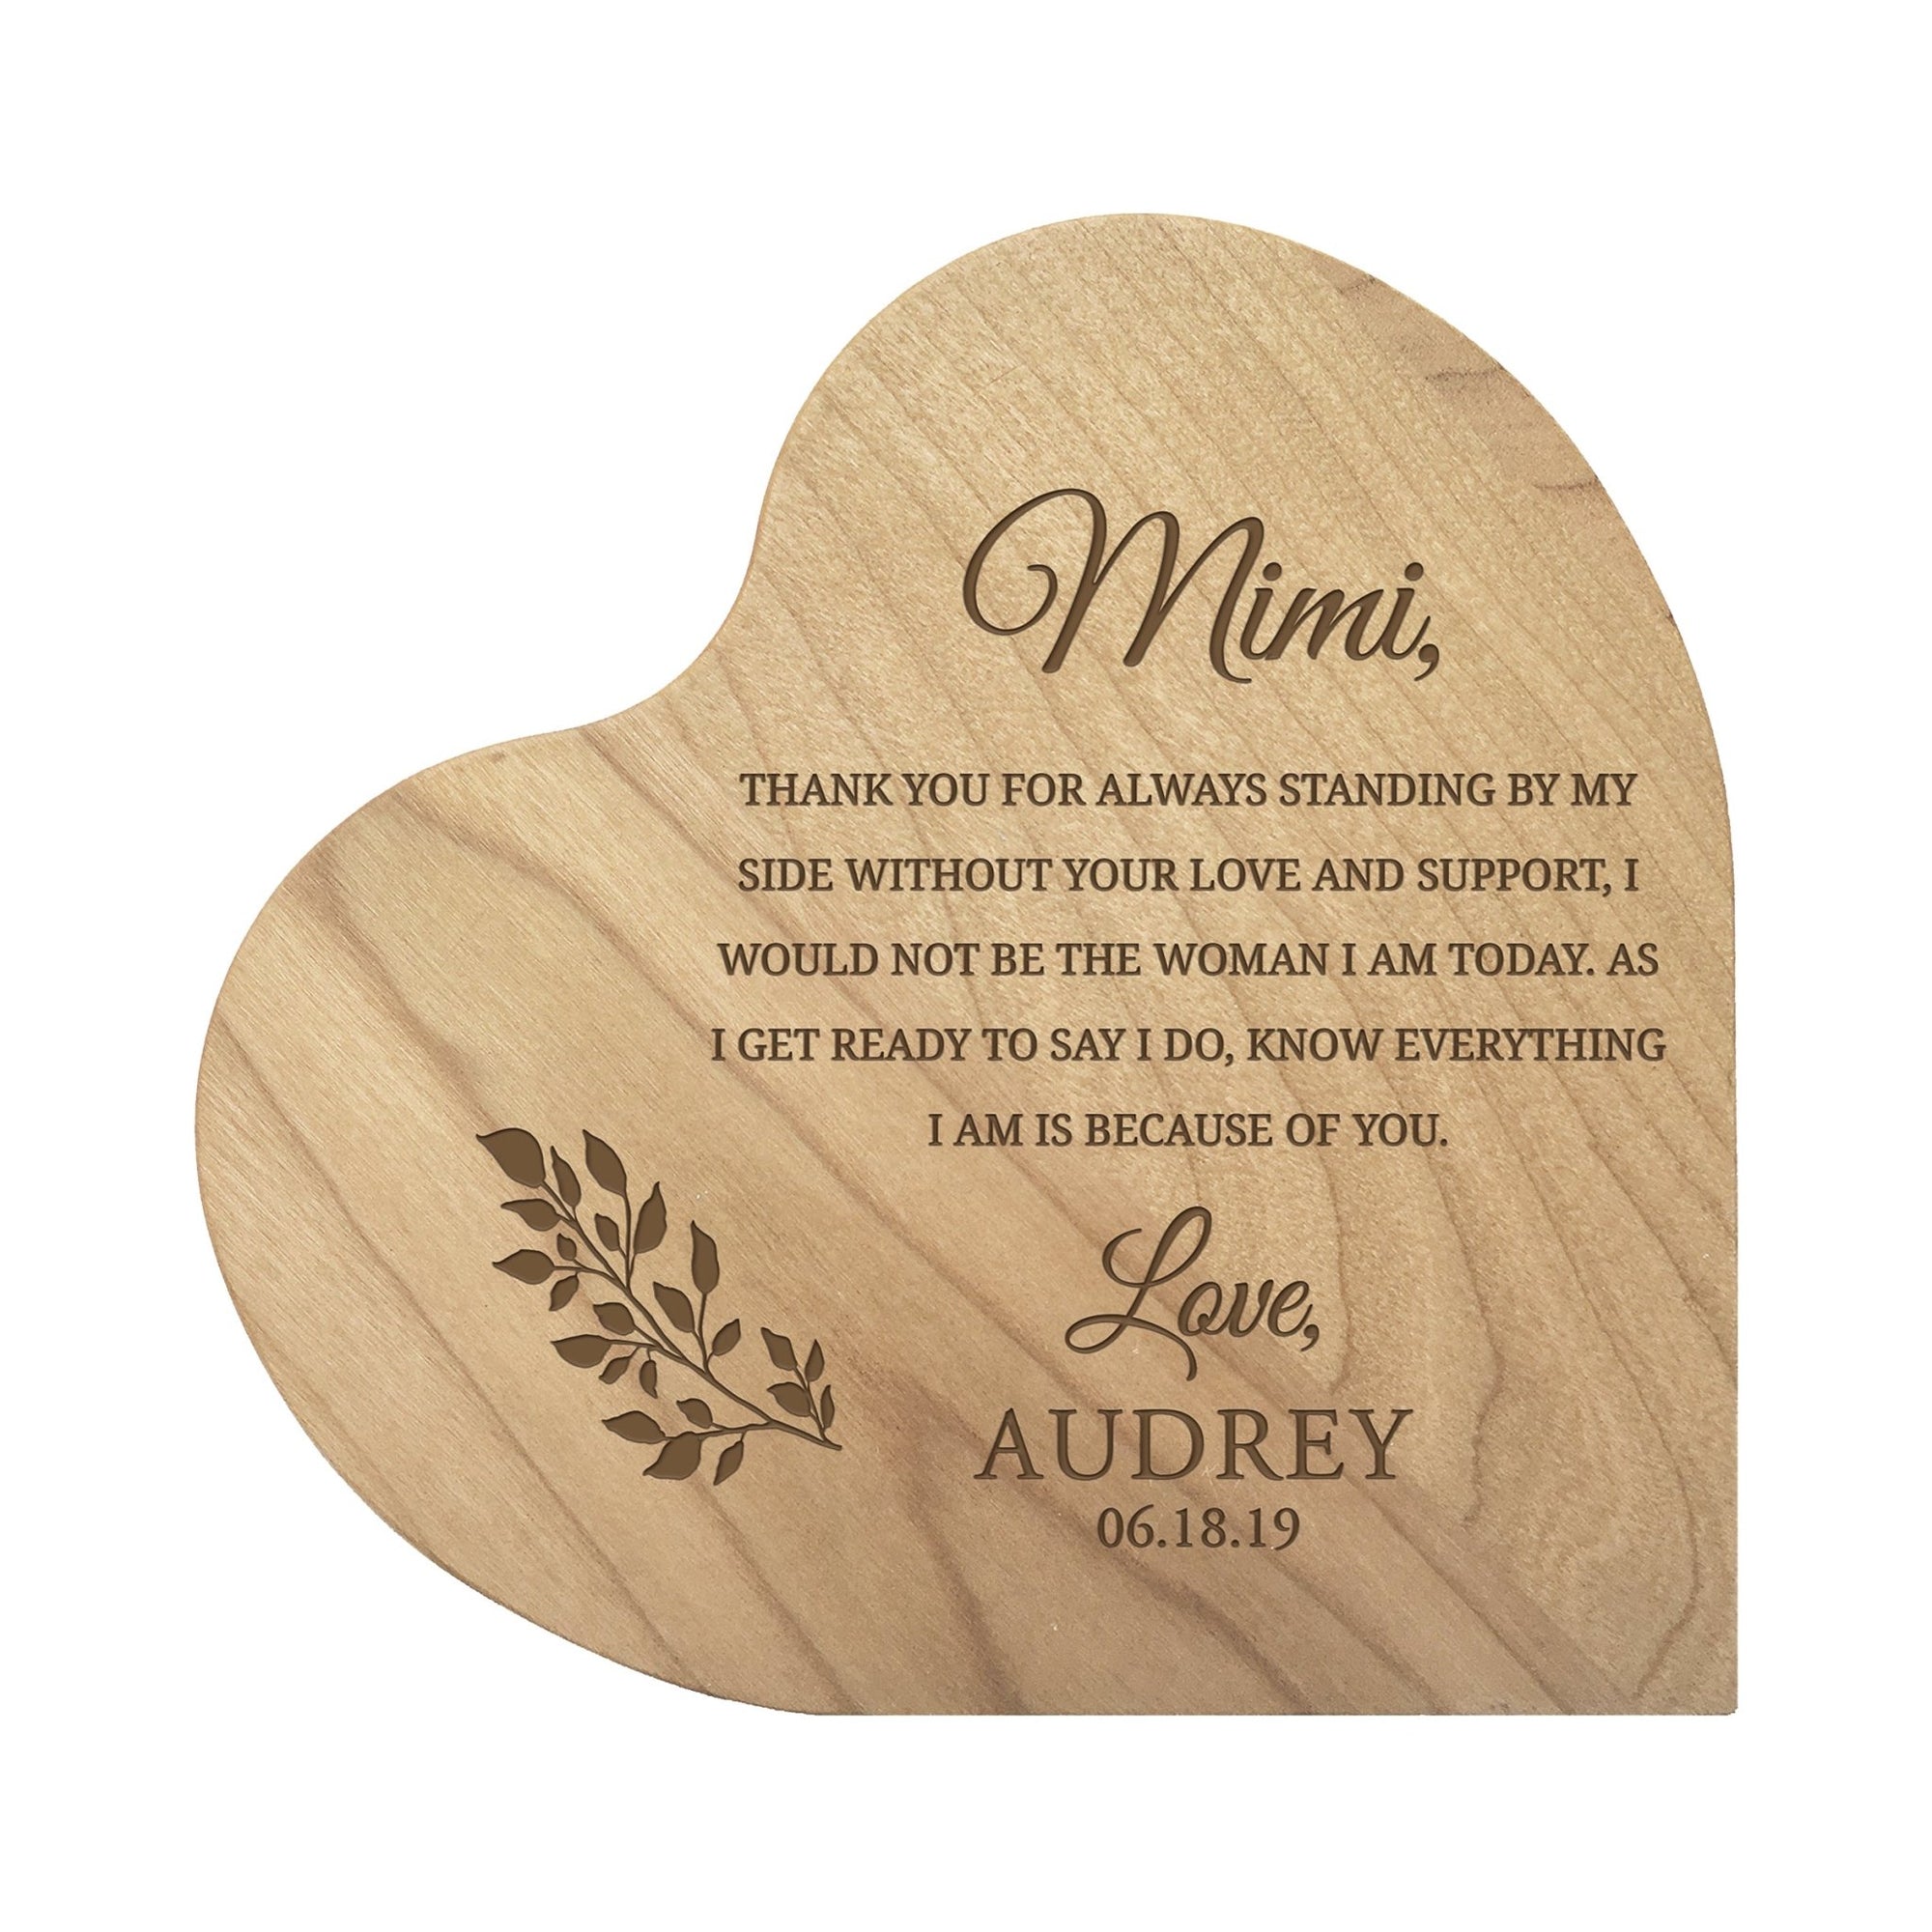 Personalized Modern Mimi’s Love Solid Wood Heart Decoration With Inspirational Verse Keepsake Gift 5x5.25 - Mimi Thank You For = Love And Support - LifeSong Milestones